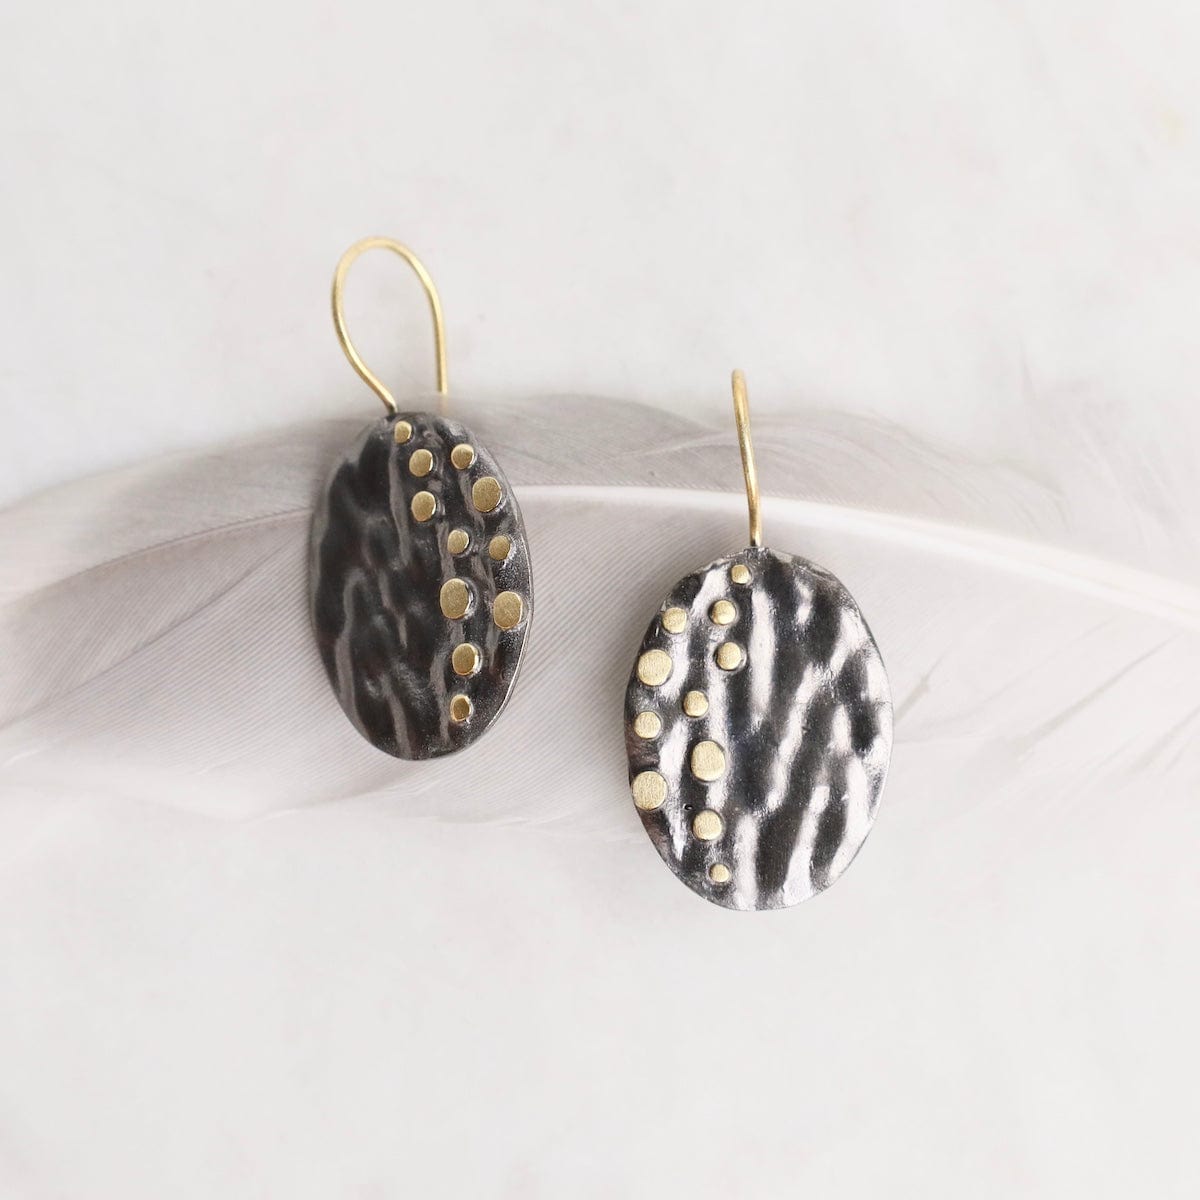 EAR-GPL Dark Rhodium Textured Oval with Gold Dots Earrings